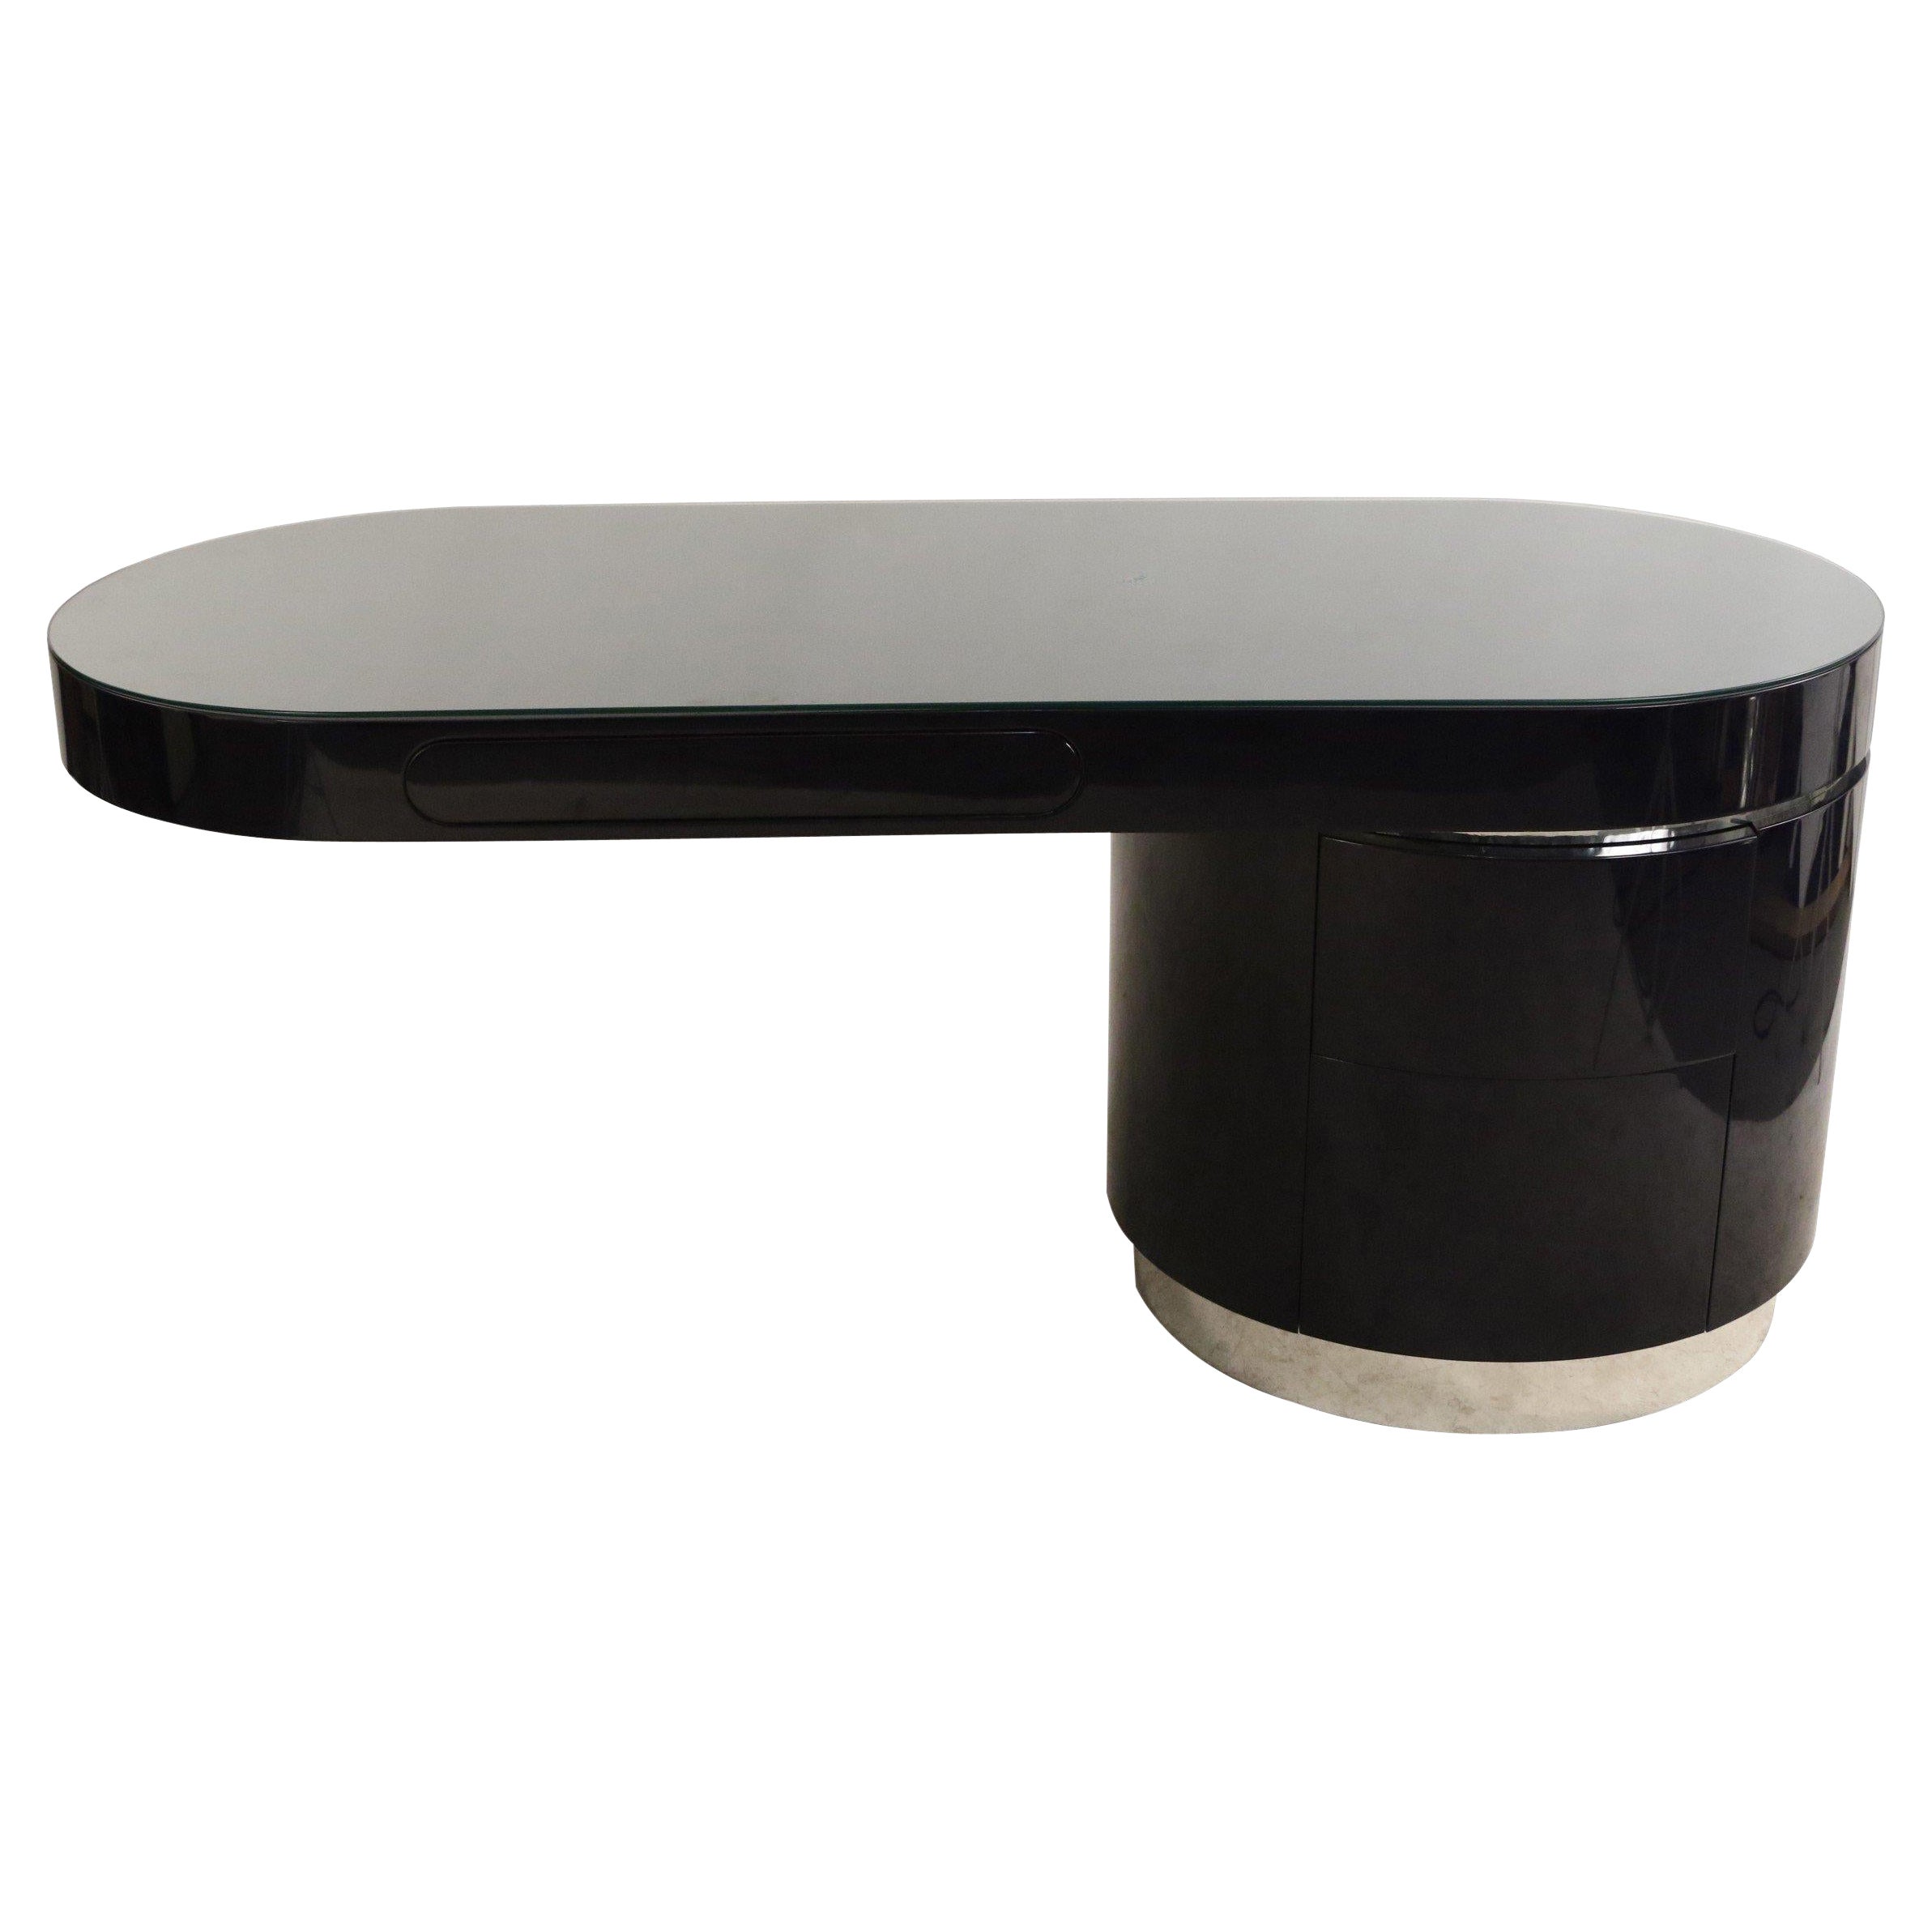 J. Wade Beam "Ponte" Lacquered Desk For Sale